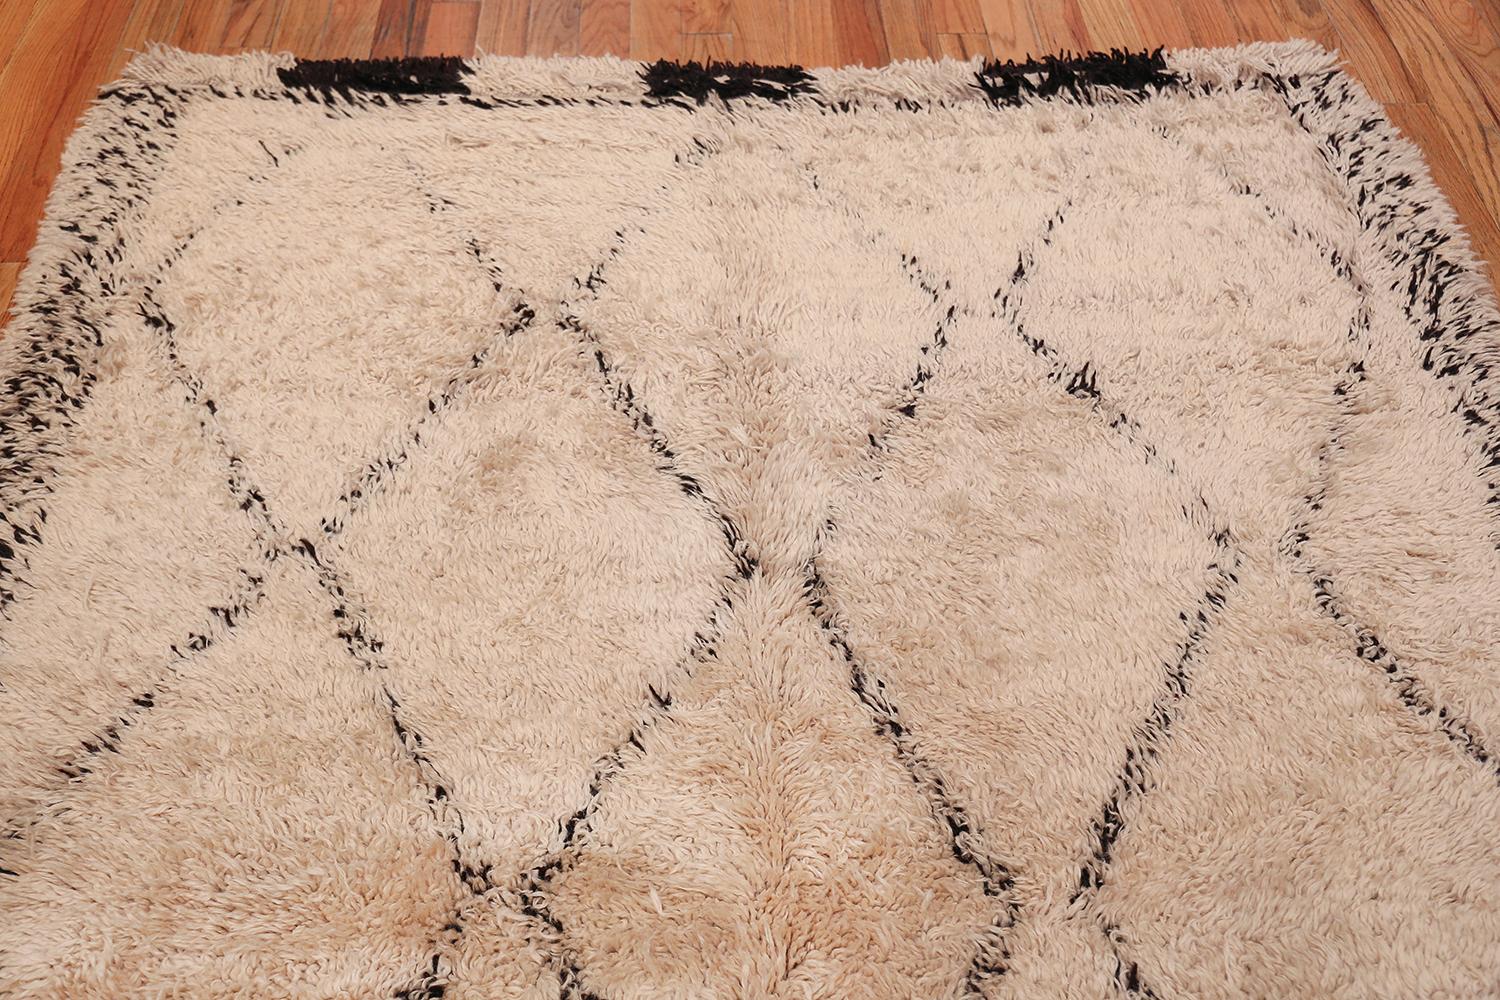 Hand-Knotted Vintage Ivory Shag Moroccan Beni Ourain Rug. Size: 6 ft 3 in x 12 ft 2 in